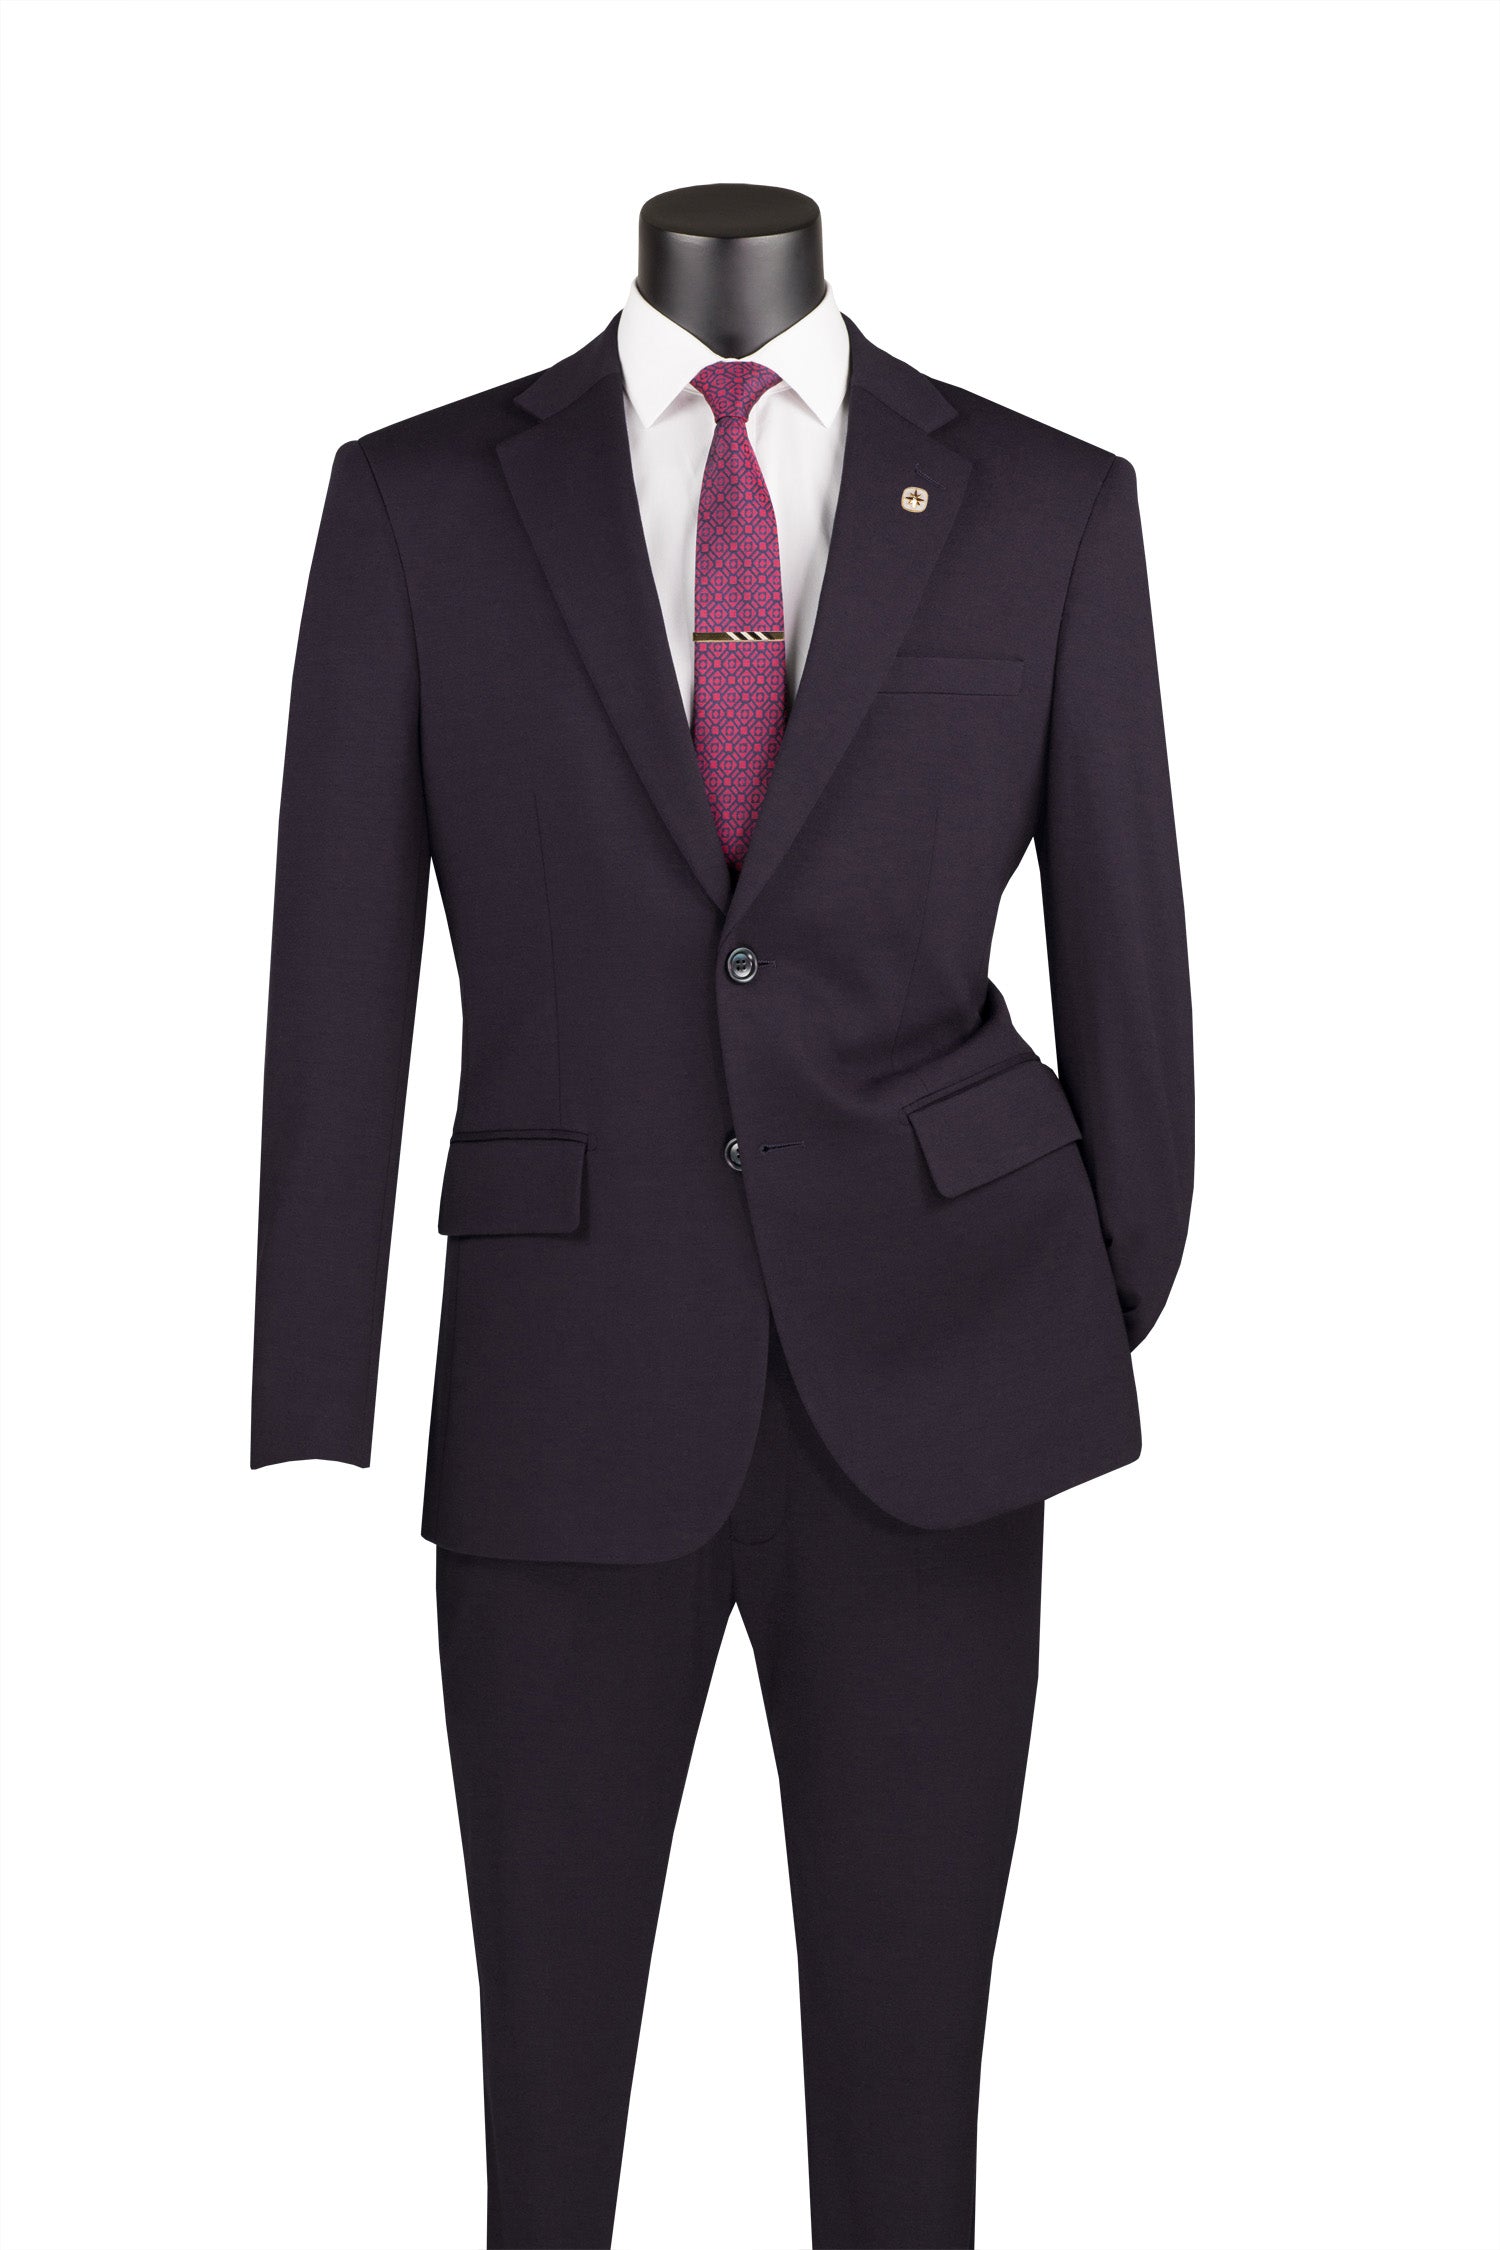 Slim Fit 2 Piece Suit Stretch Fabric Suit with Adjustable Waistband in Charcoal